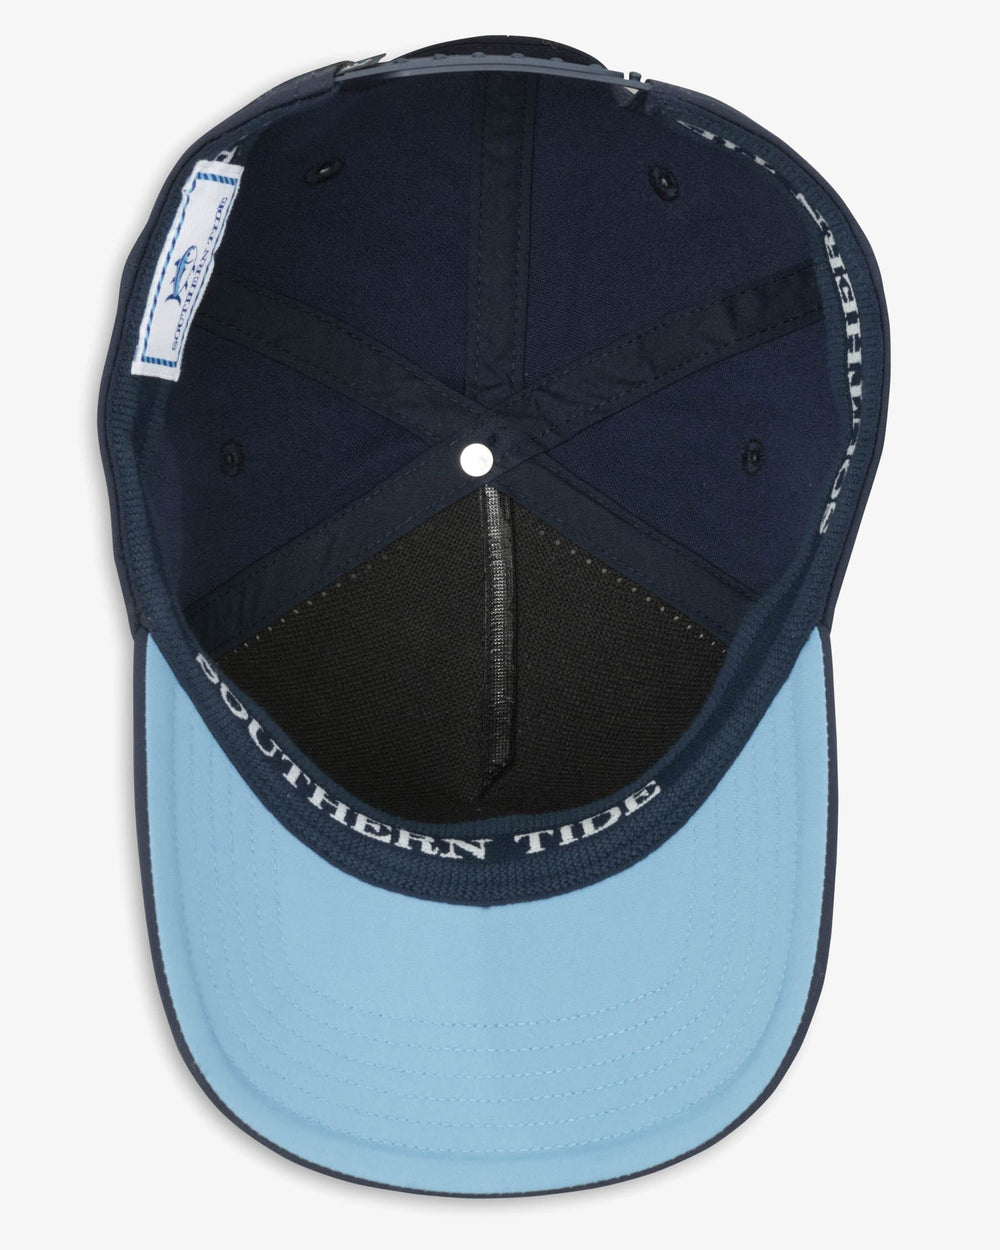 The interior view of the Garrison Perforated Performance Hat by Southern Tide - Navy